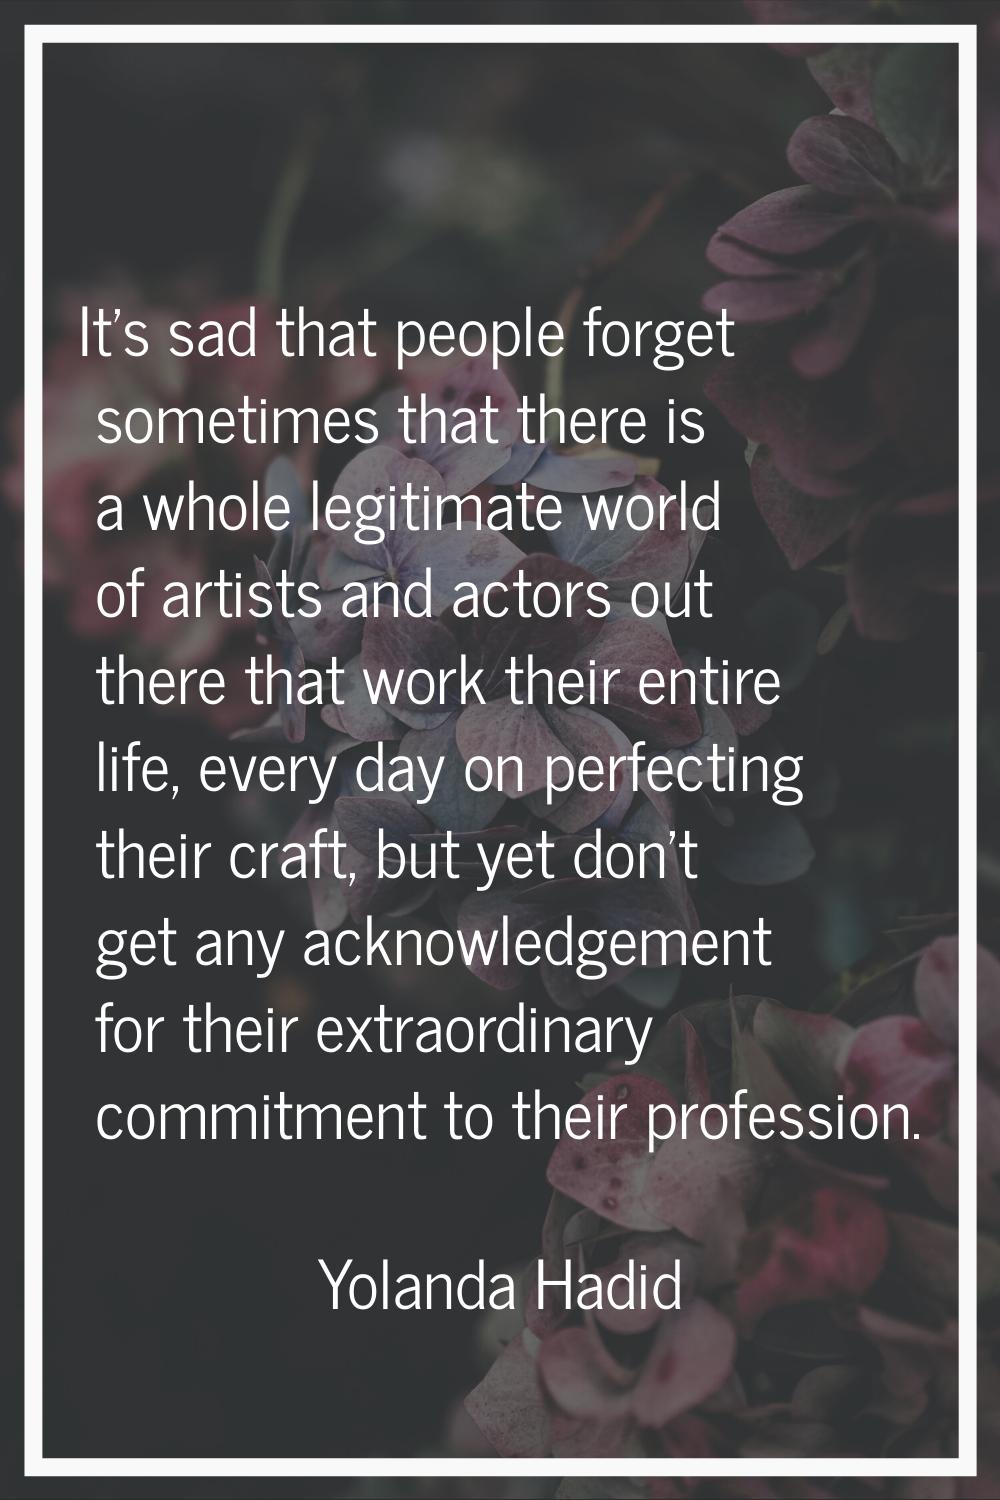 It's sad that people forget sometimes that there is a whole legitimate world of artists and actors 